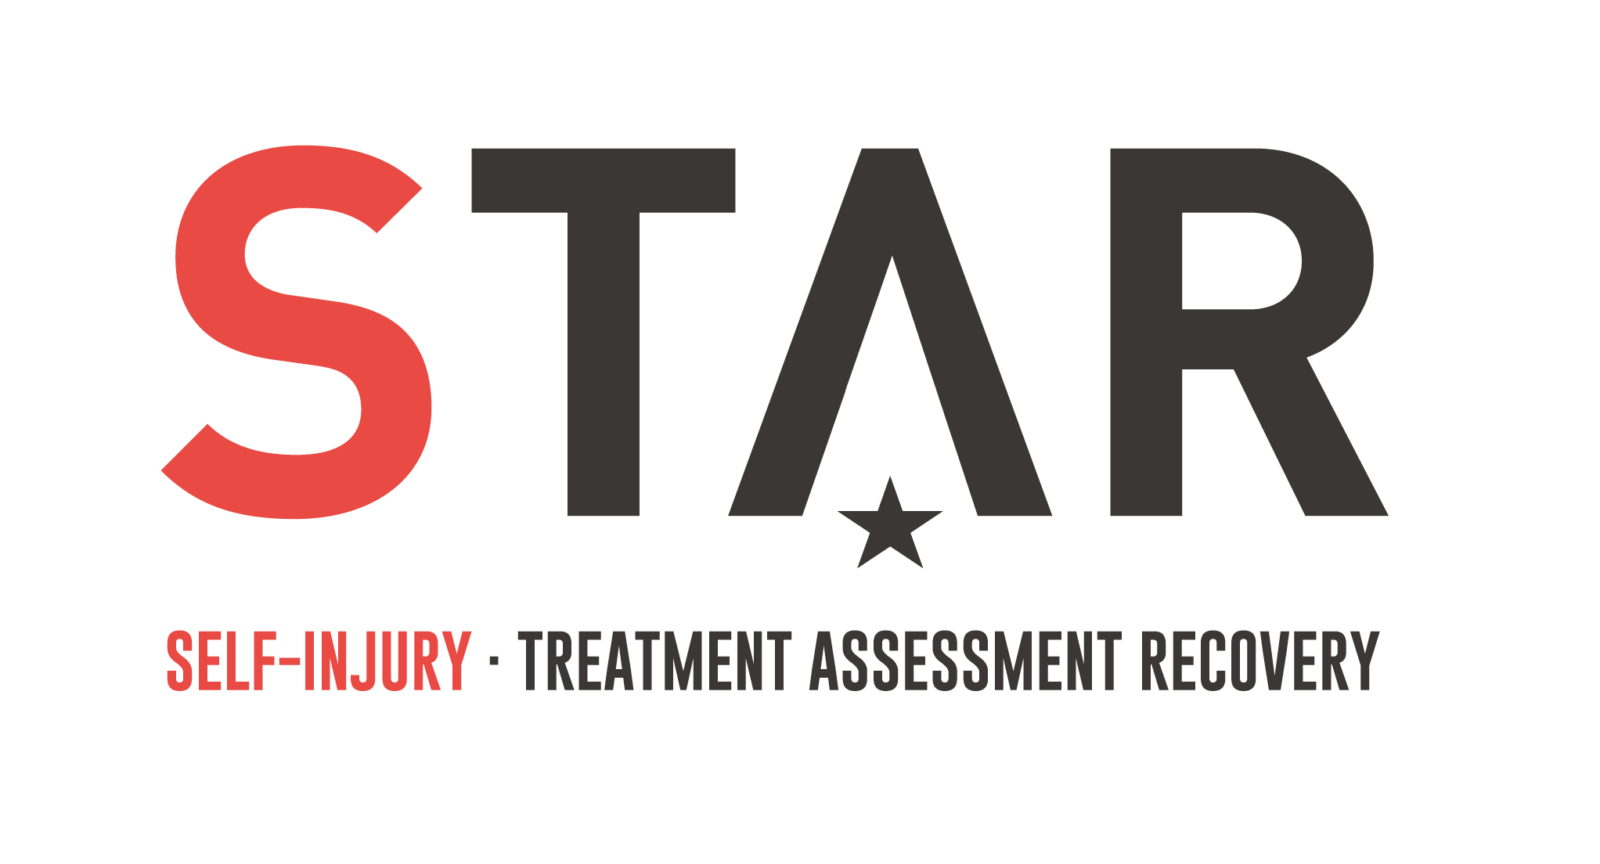 Logo: Star Self-Injury Treatment Assessment Recovery